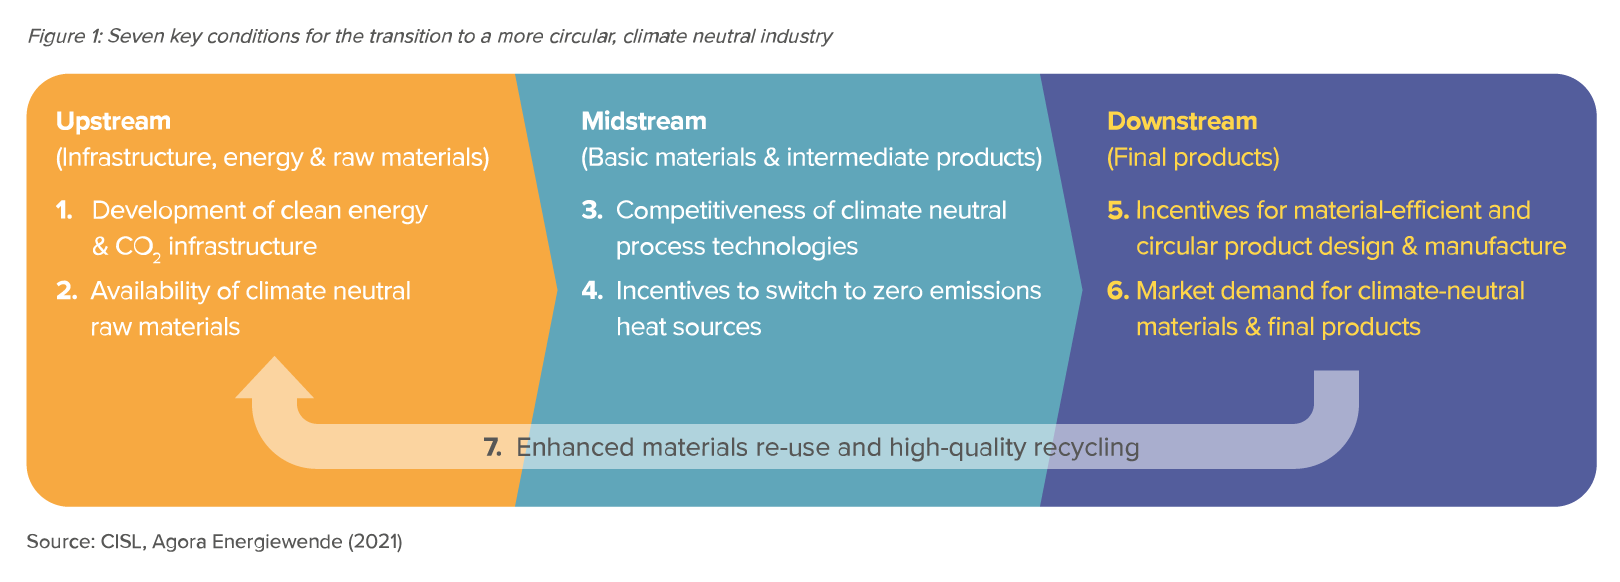 Preview for Seven key conditions for the transition to a more circular, climate neutral industry